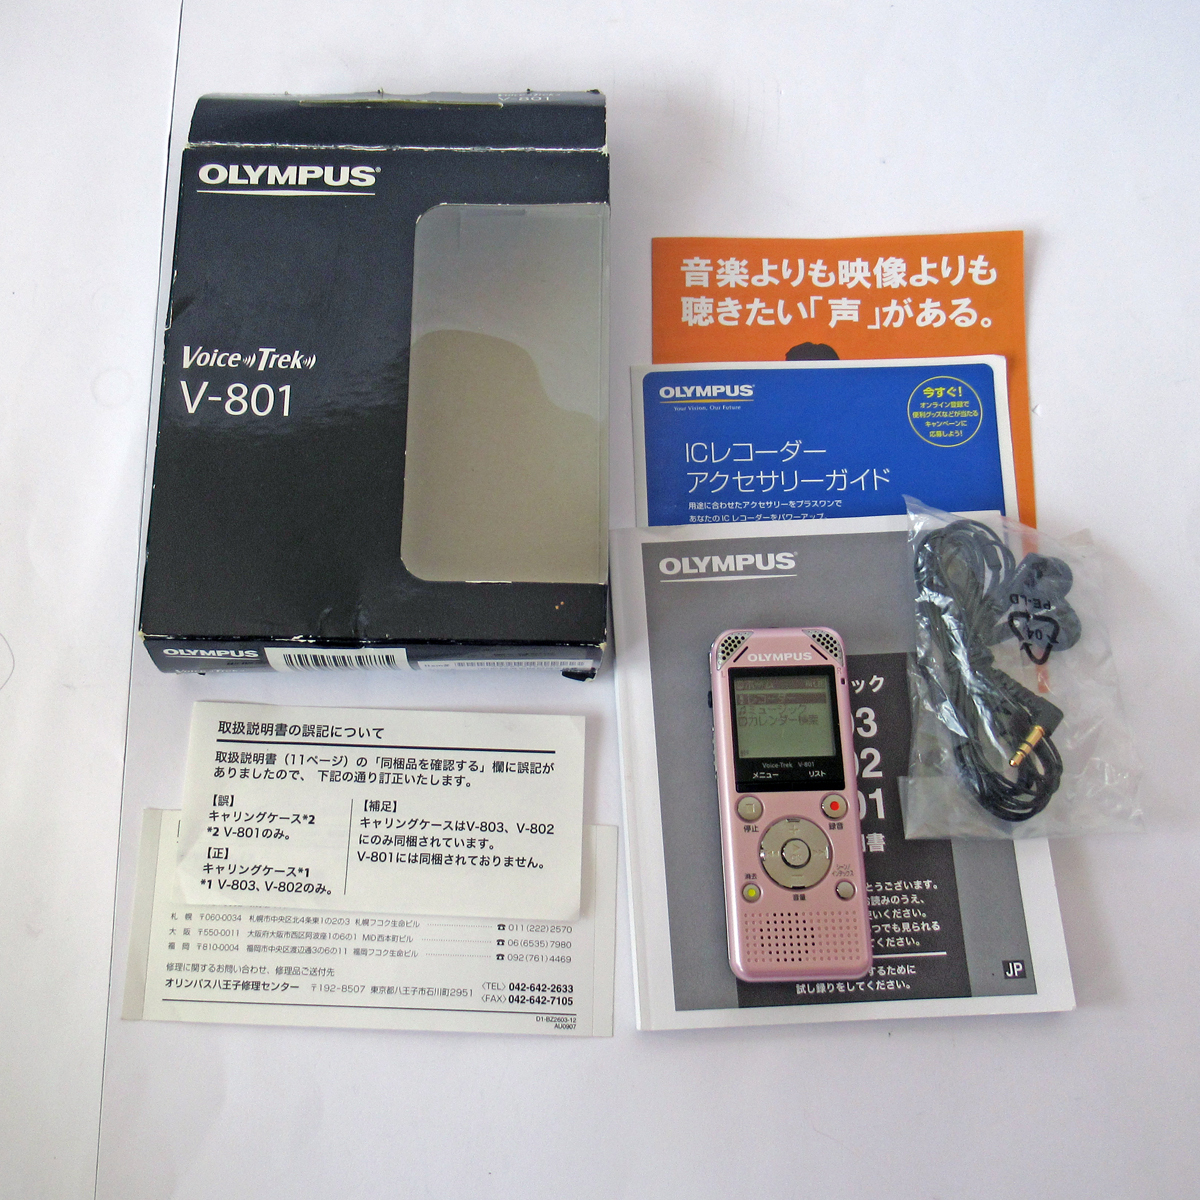 **[ free shipping ]OLYMPUS VoiceTrek V-801 PNK( pink ) Olympus voice recorder used operation verification goods **